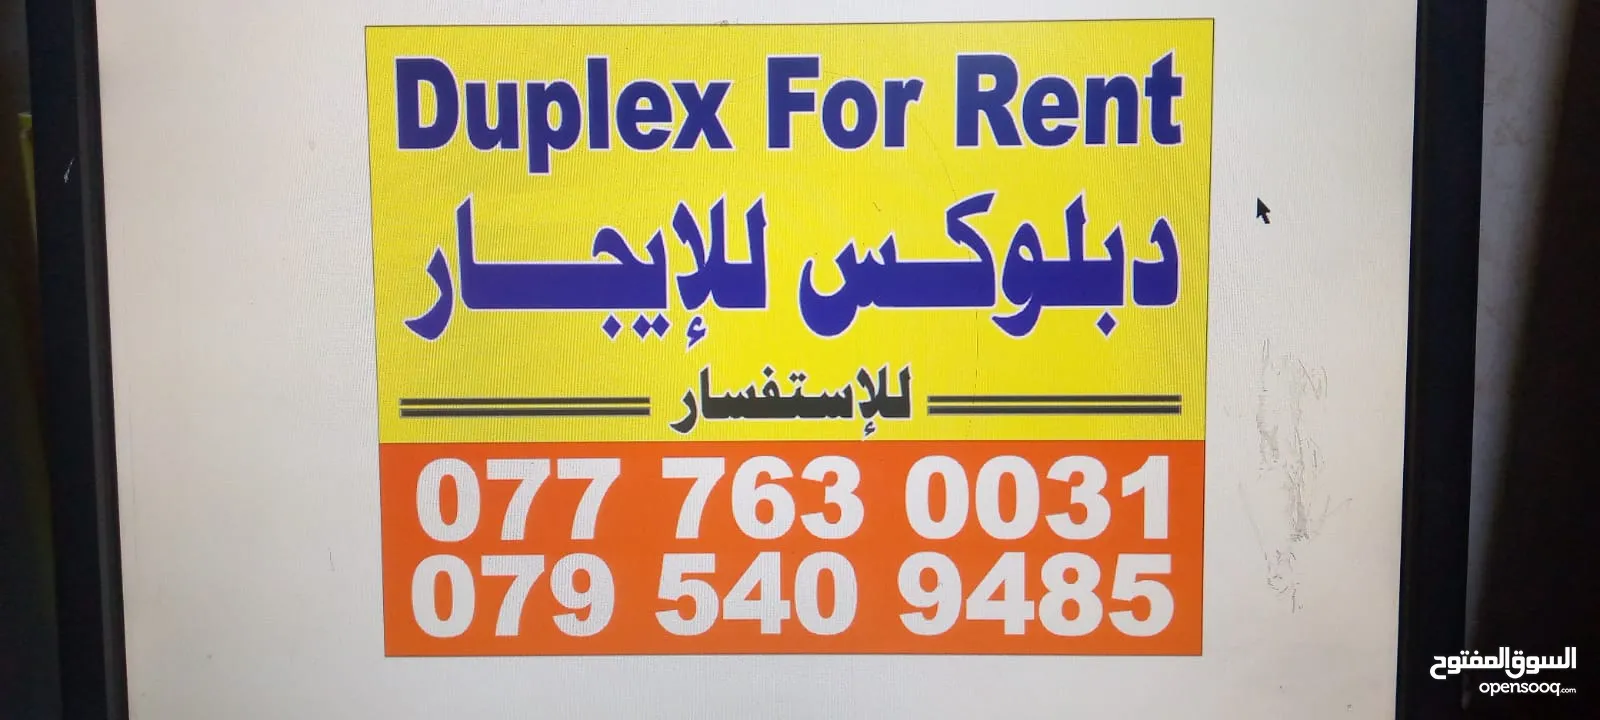 Excellent Furnished Duplex with Garden and Garage in a quiet area of Dabouq- Close to all services